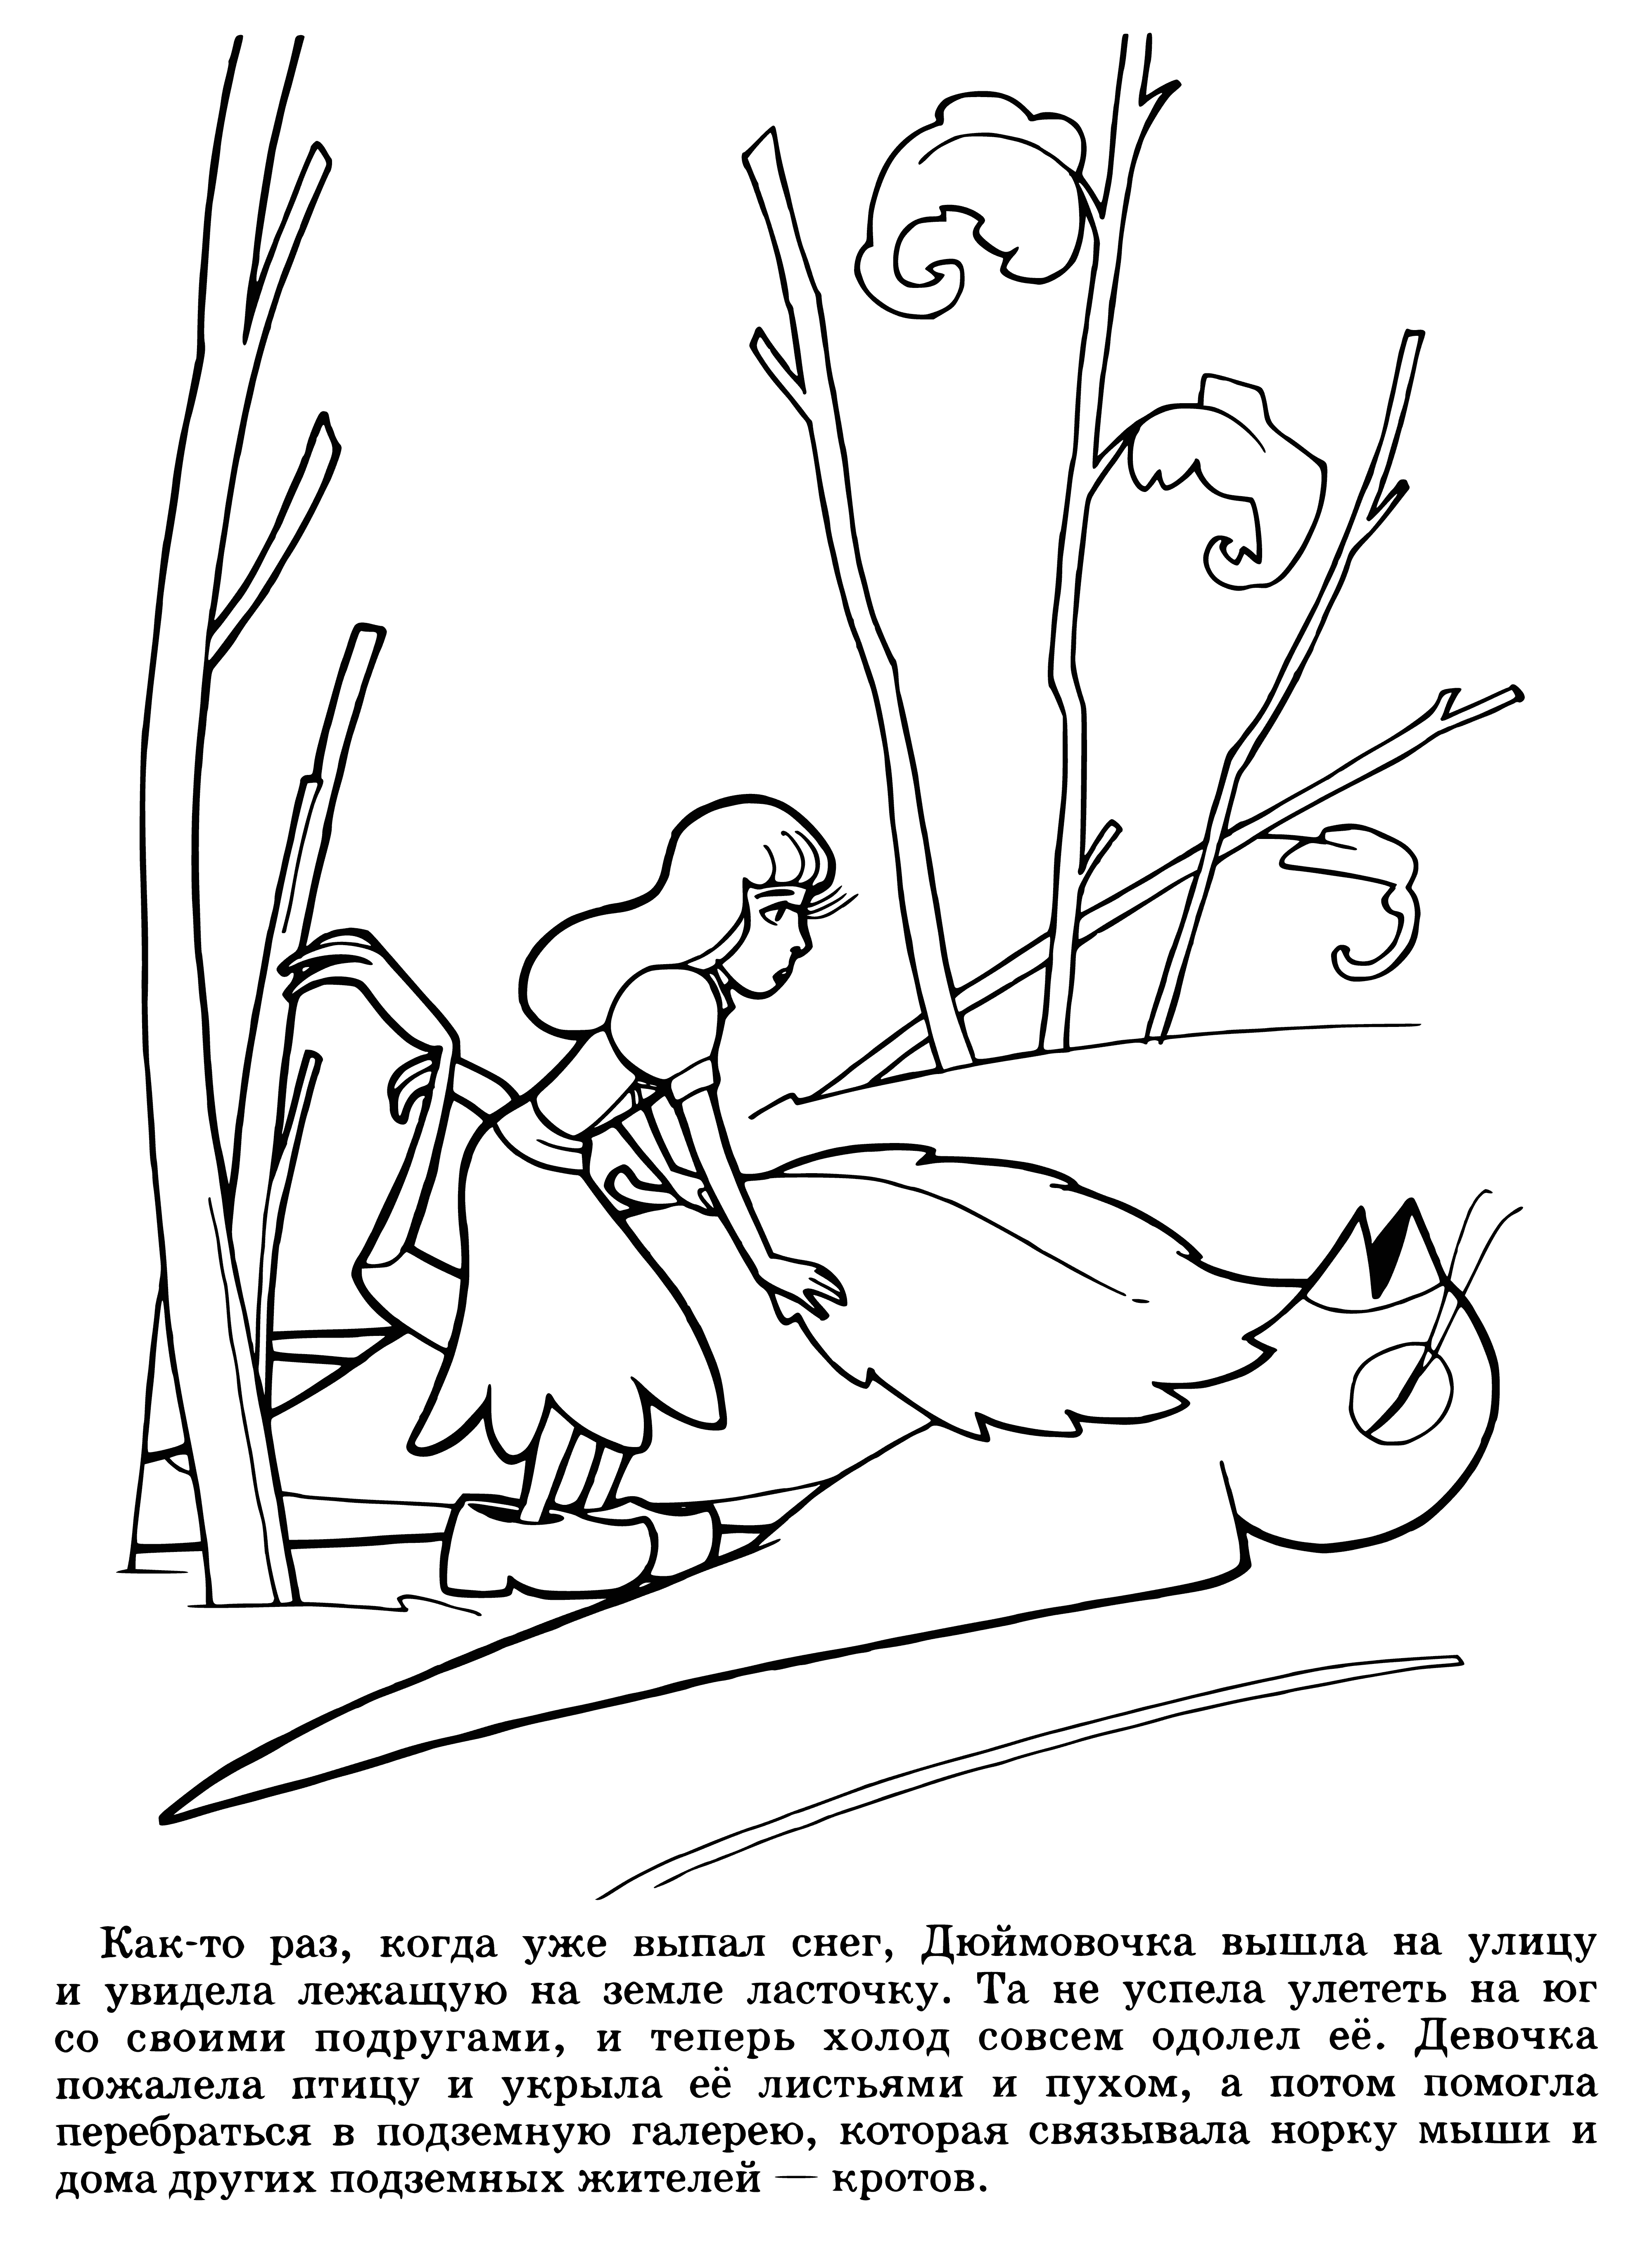 coloring page: Two children explore a beautiful bird in a cage, both happily sharing the experience.